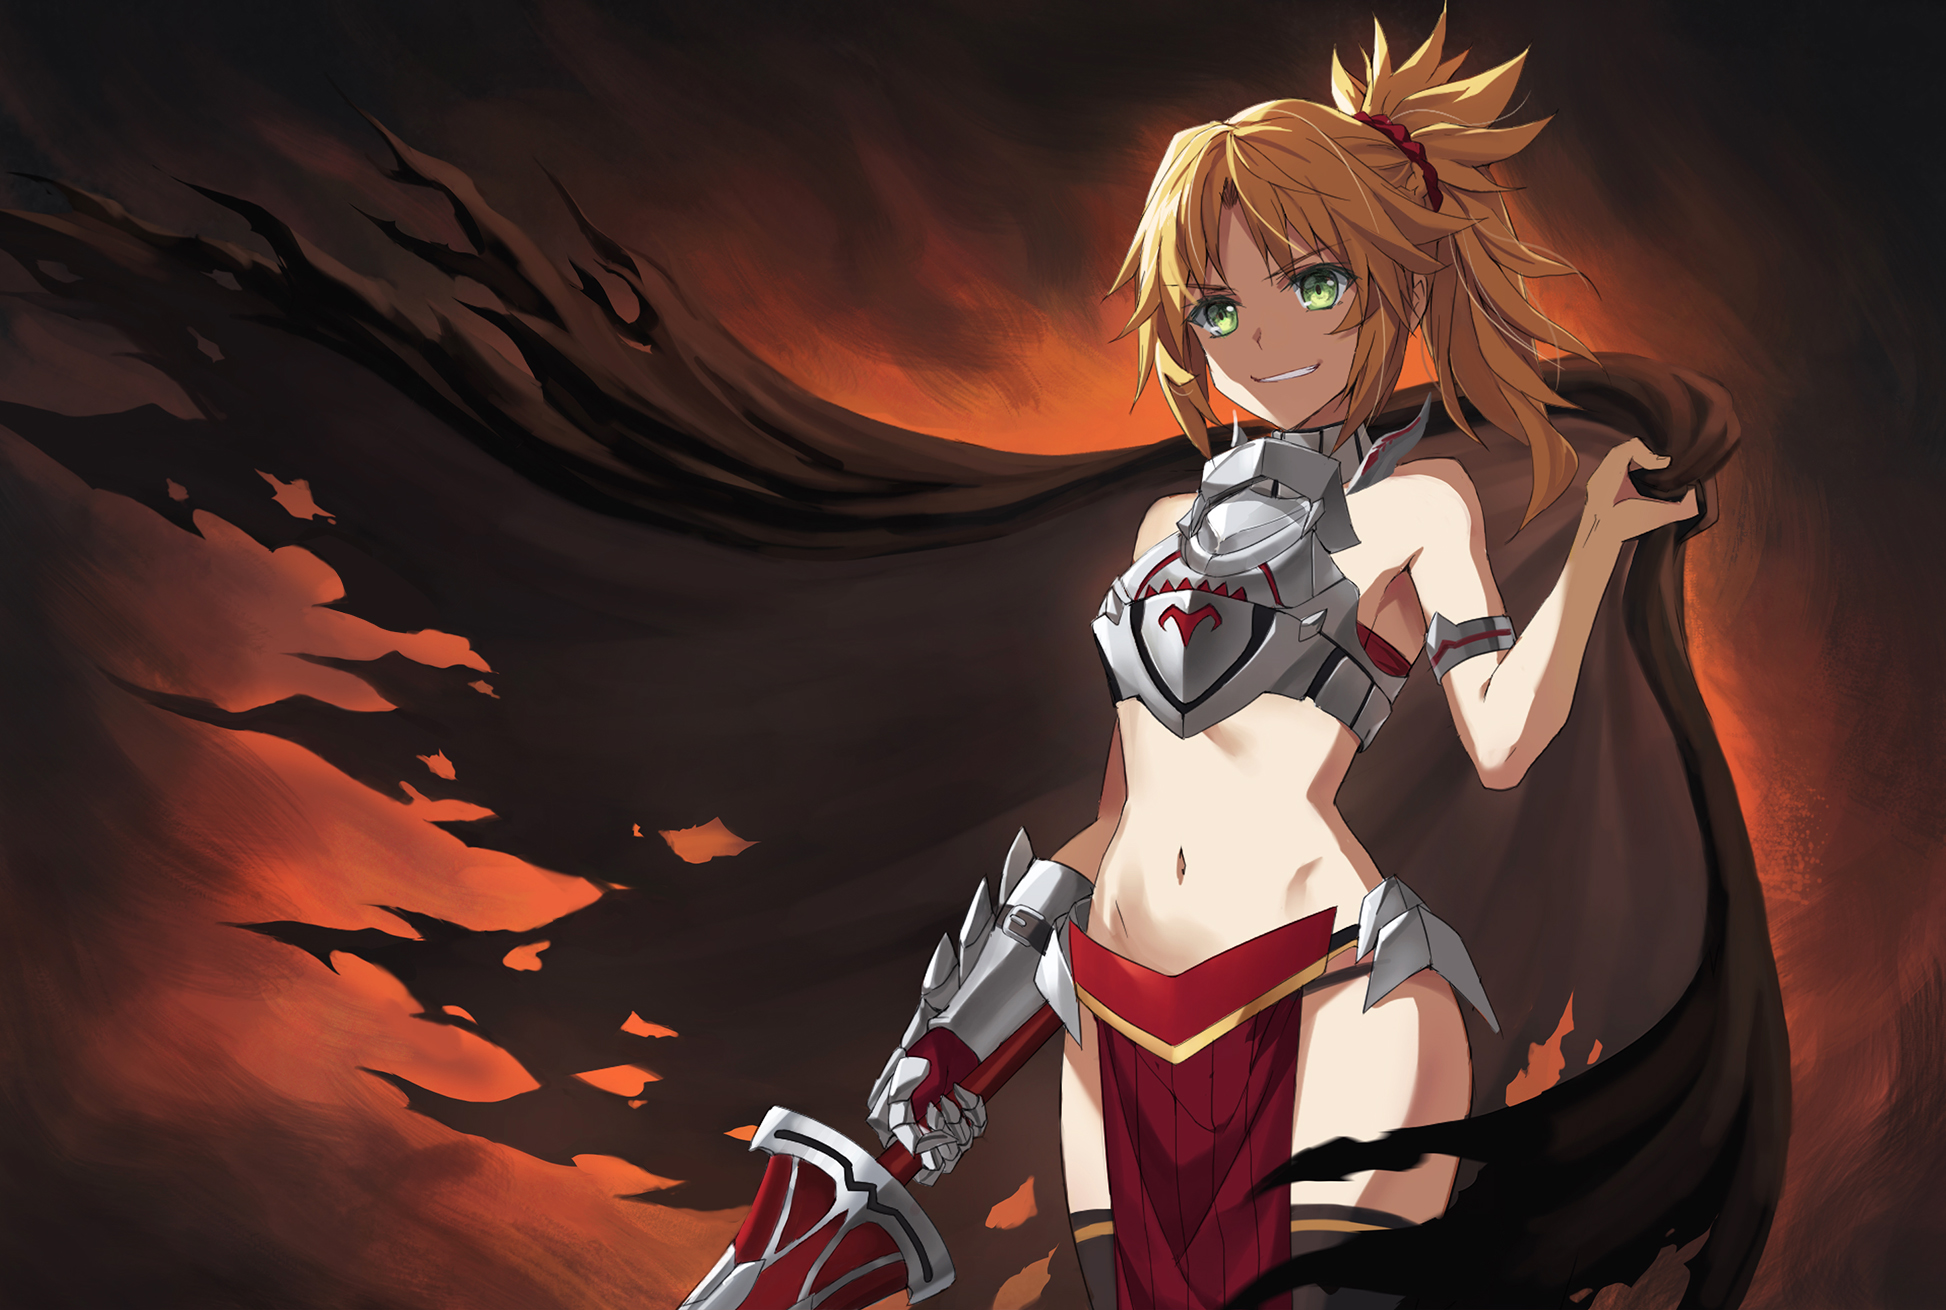 Anime Girls Sword Mordred Fate Apocrypha Fate Series Fate Apocrypha Tonee Blonde Green Eyes Grin Arm 1946x1310